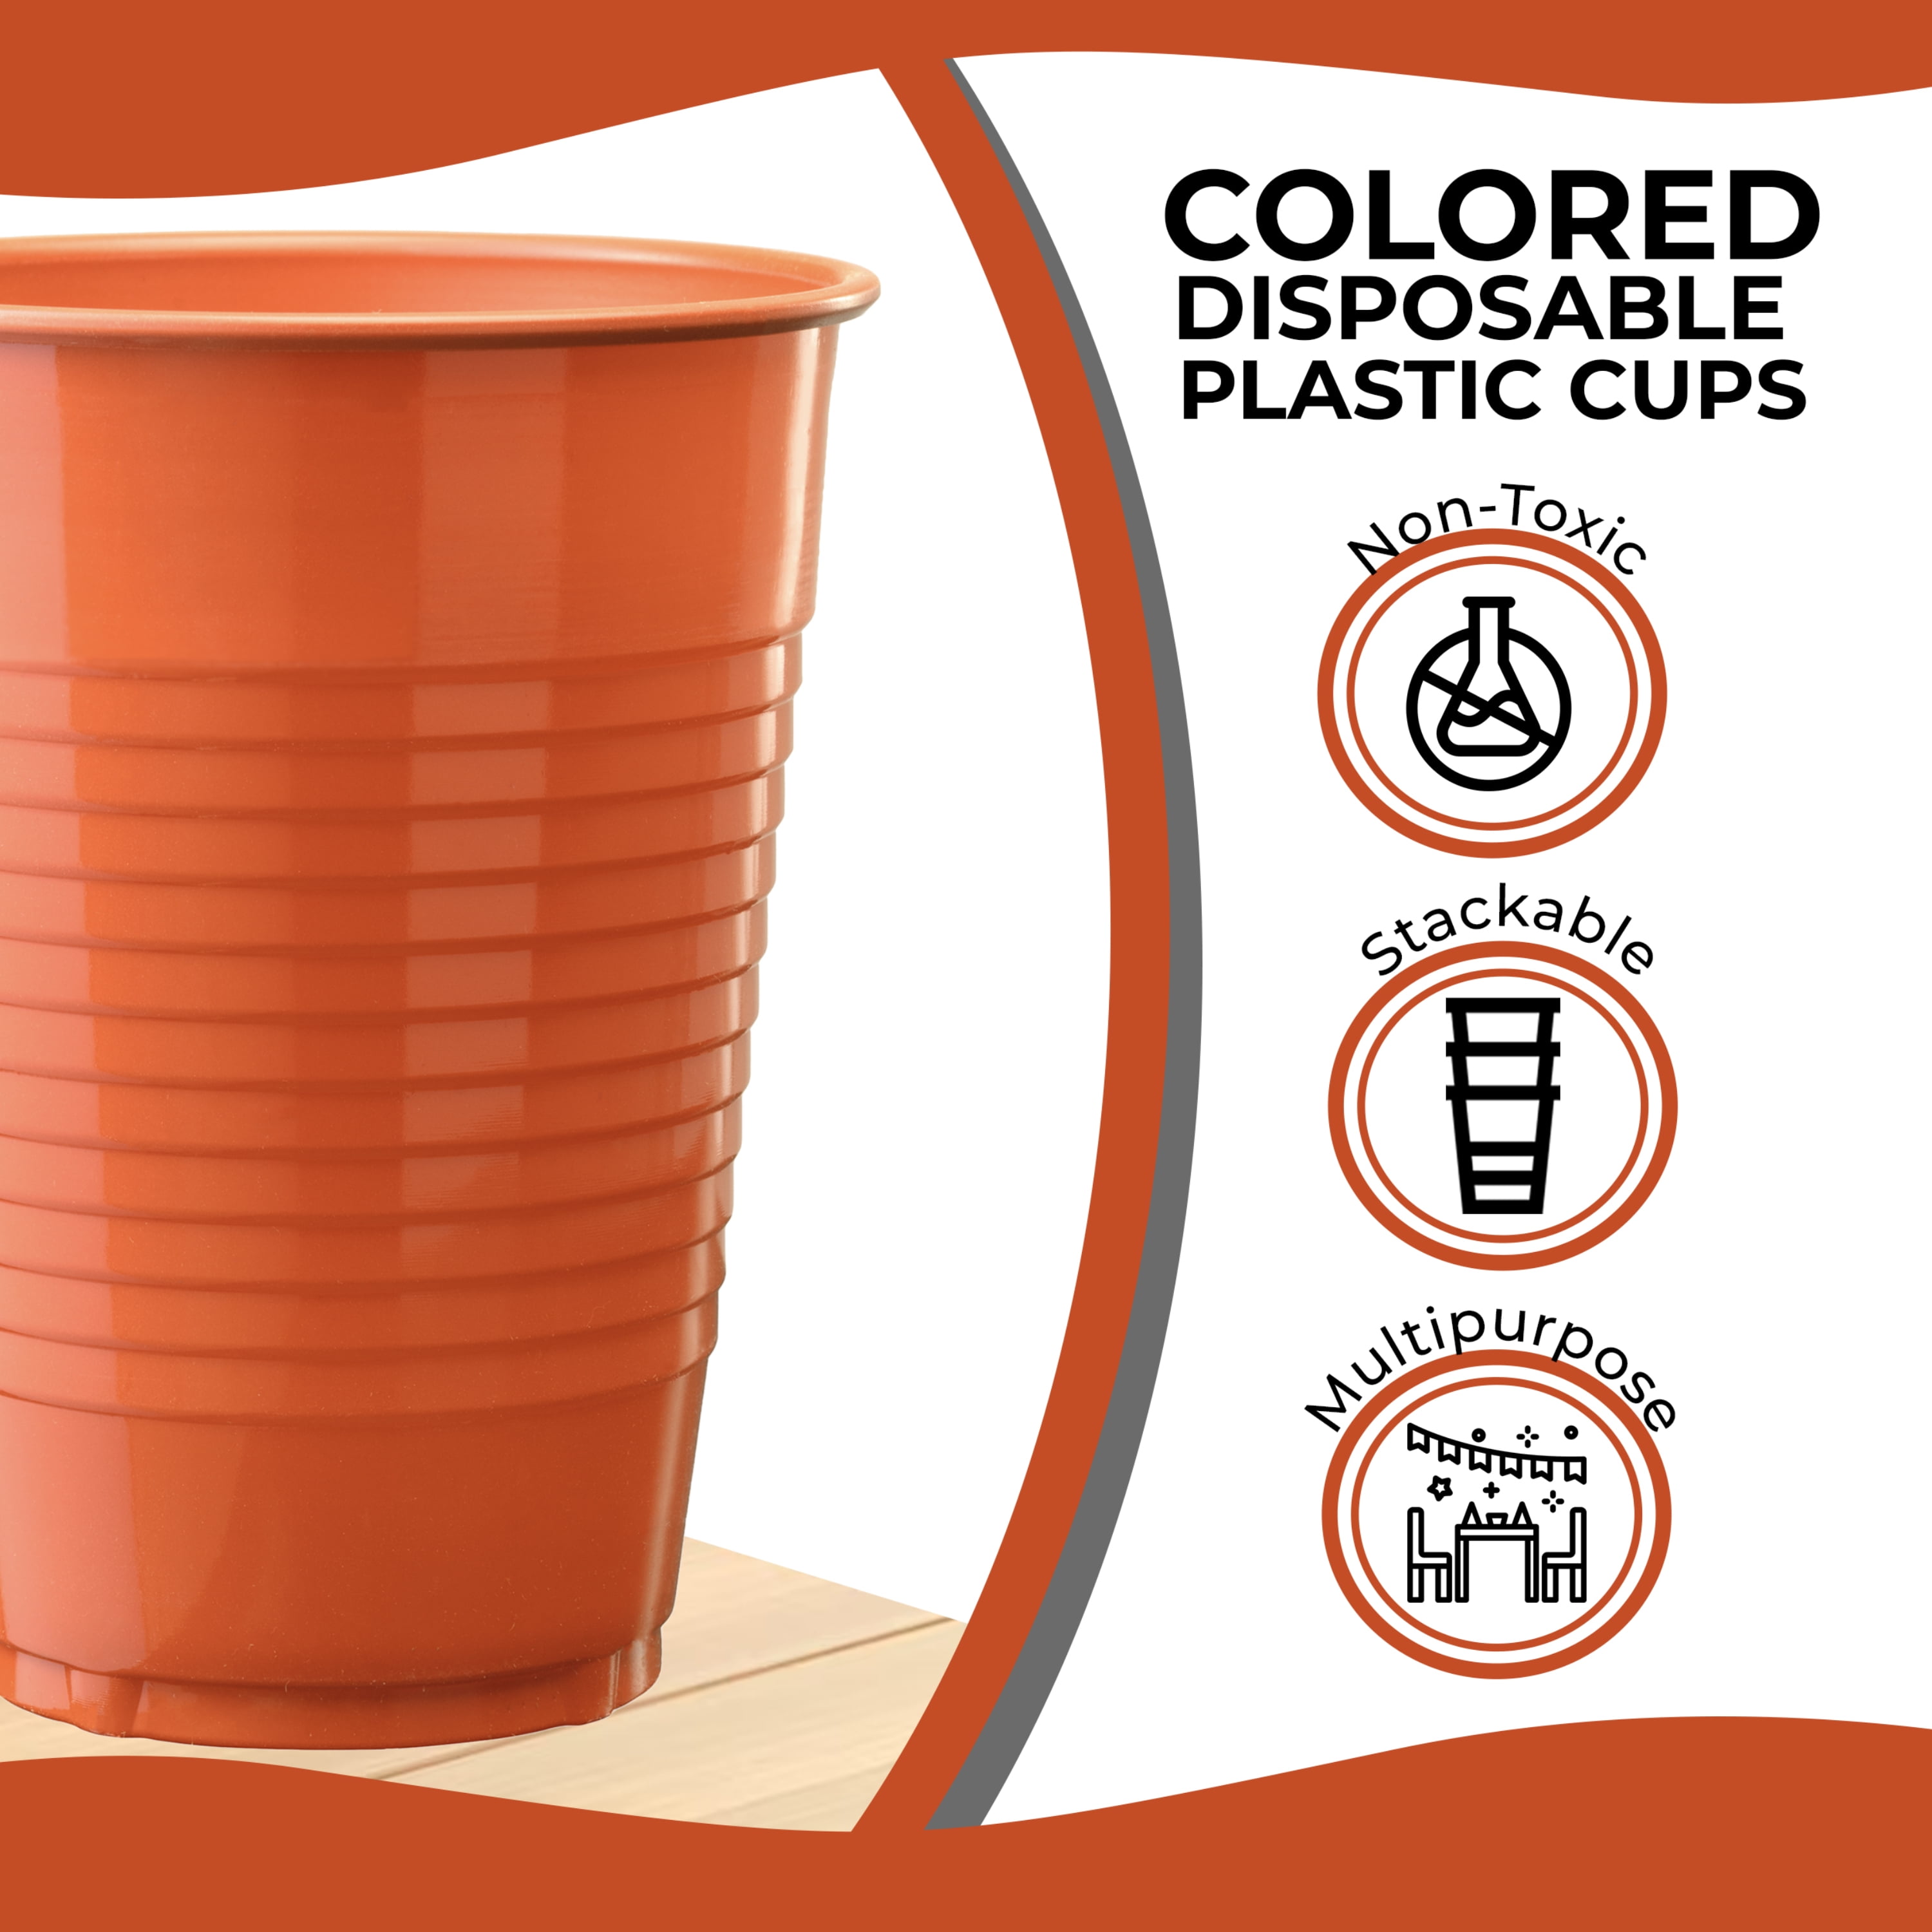 16 oz Orange Party Cups, 50 pack by True, Pack of 1 - Kroger